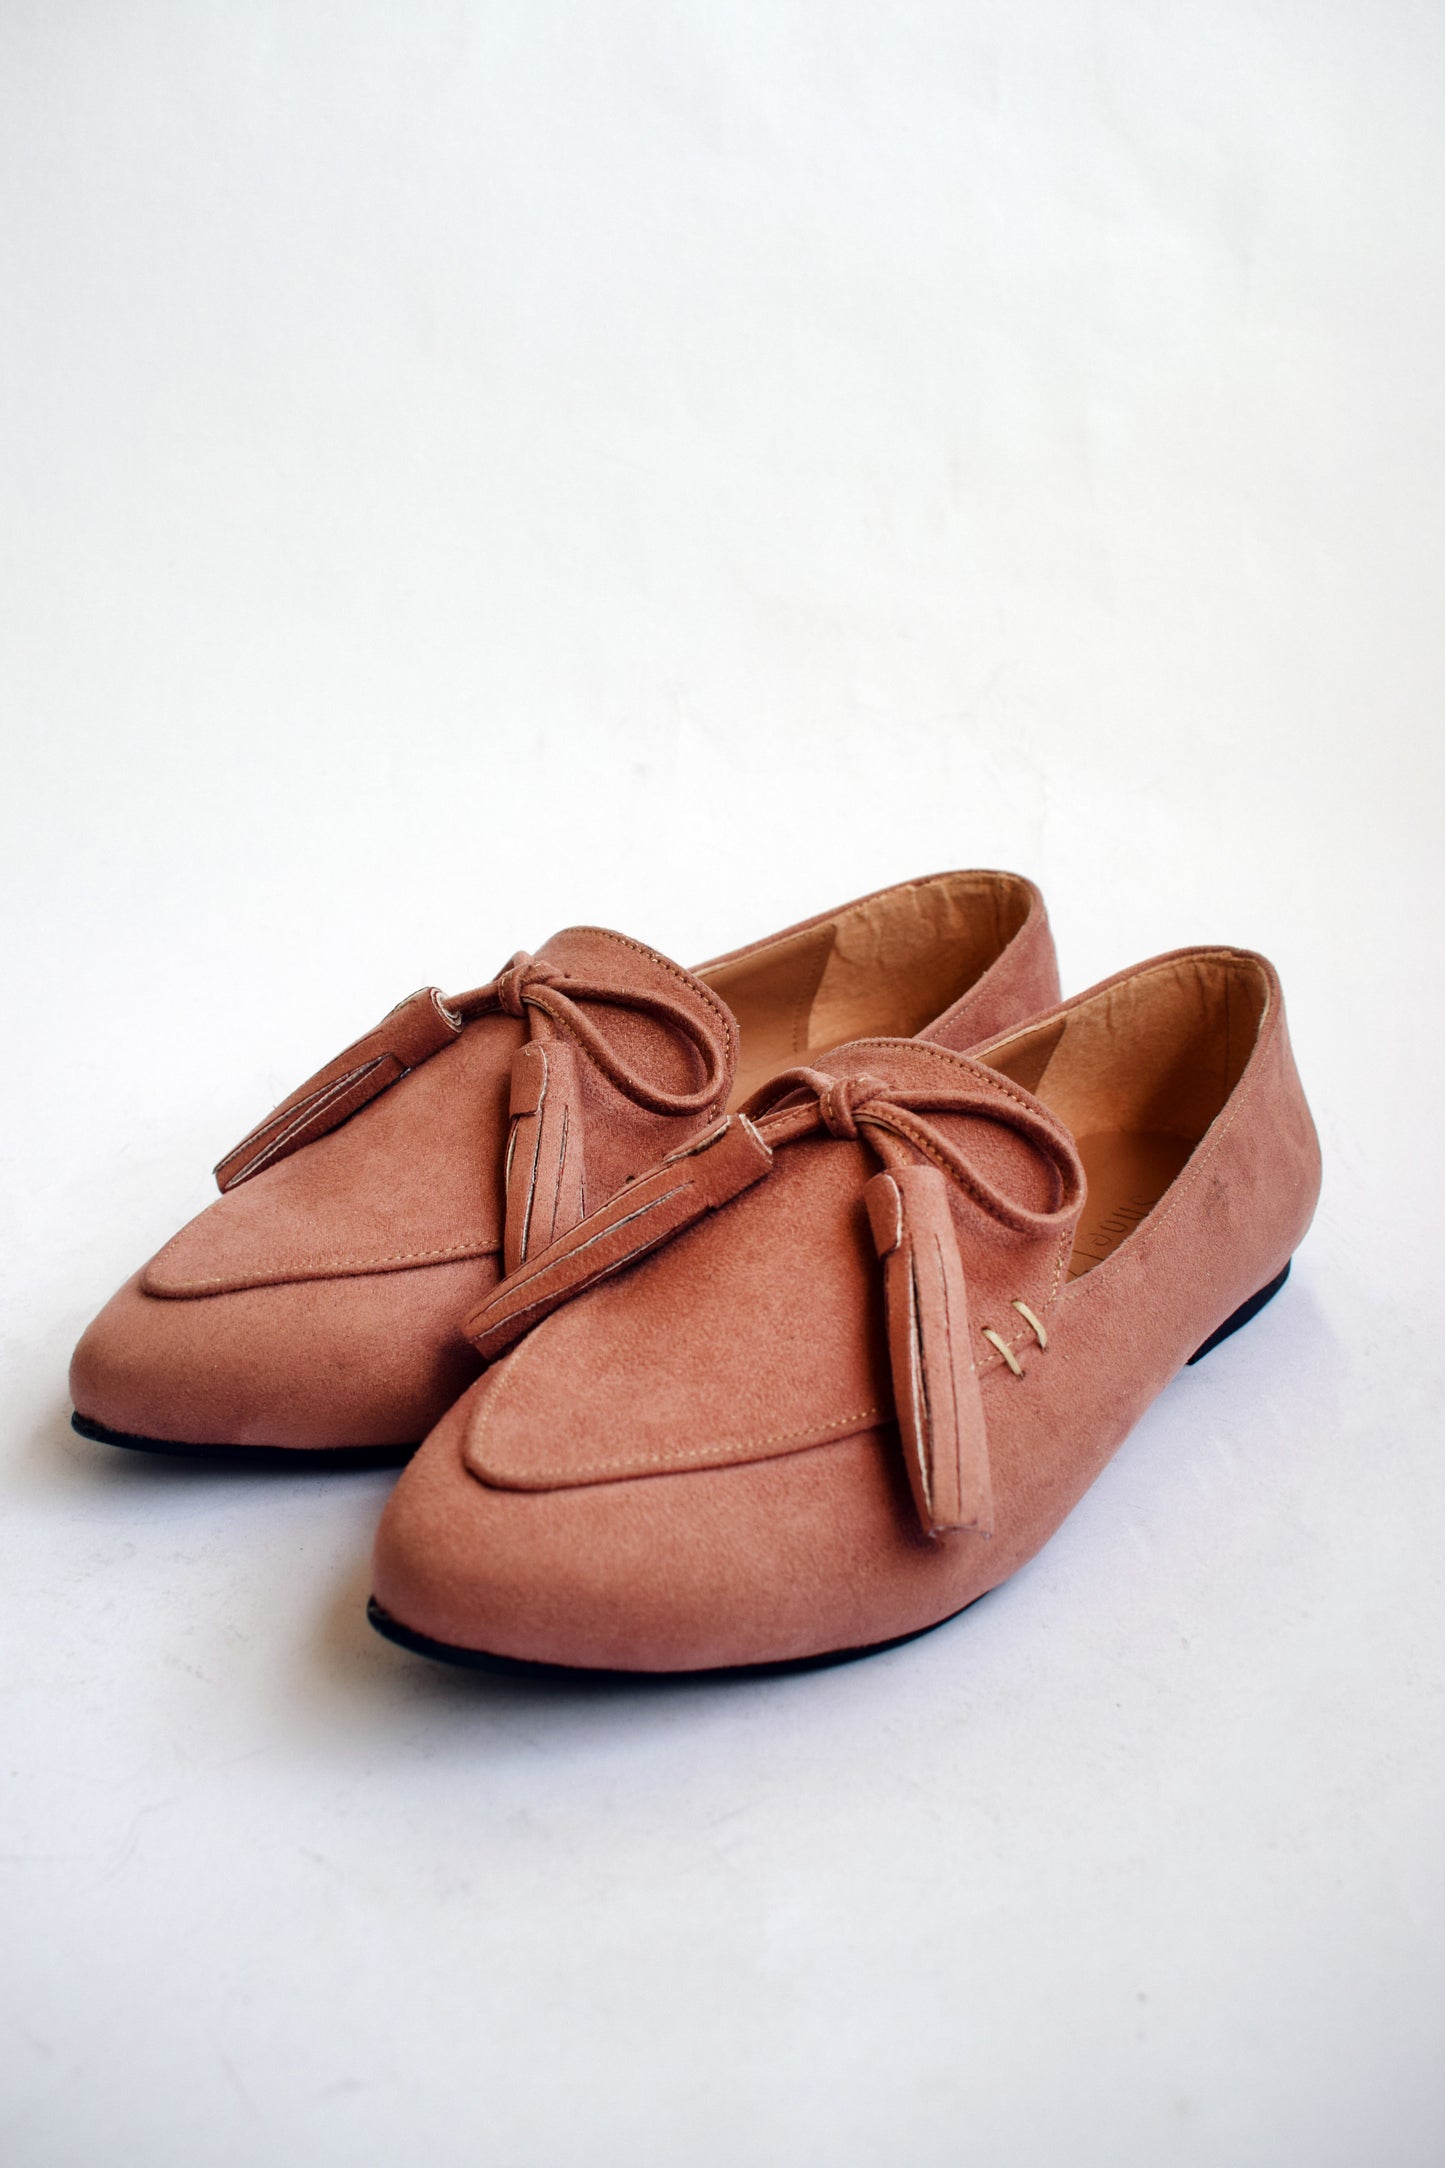 Nude Pink Pointed Bow Tasseled Loafers